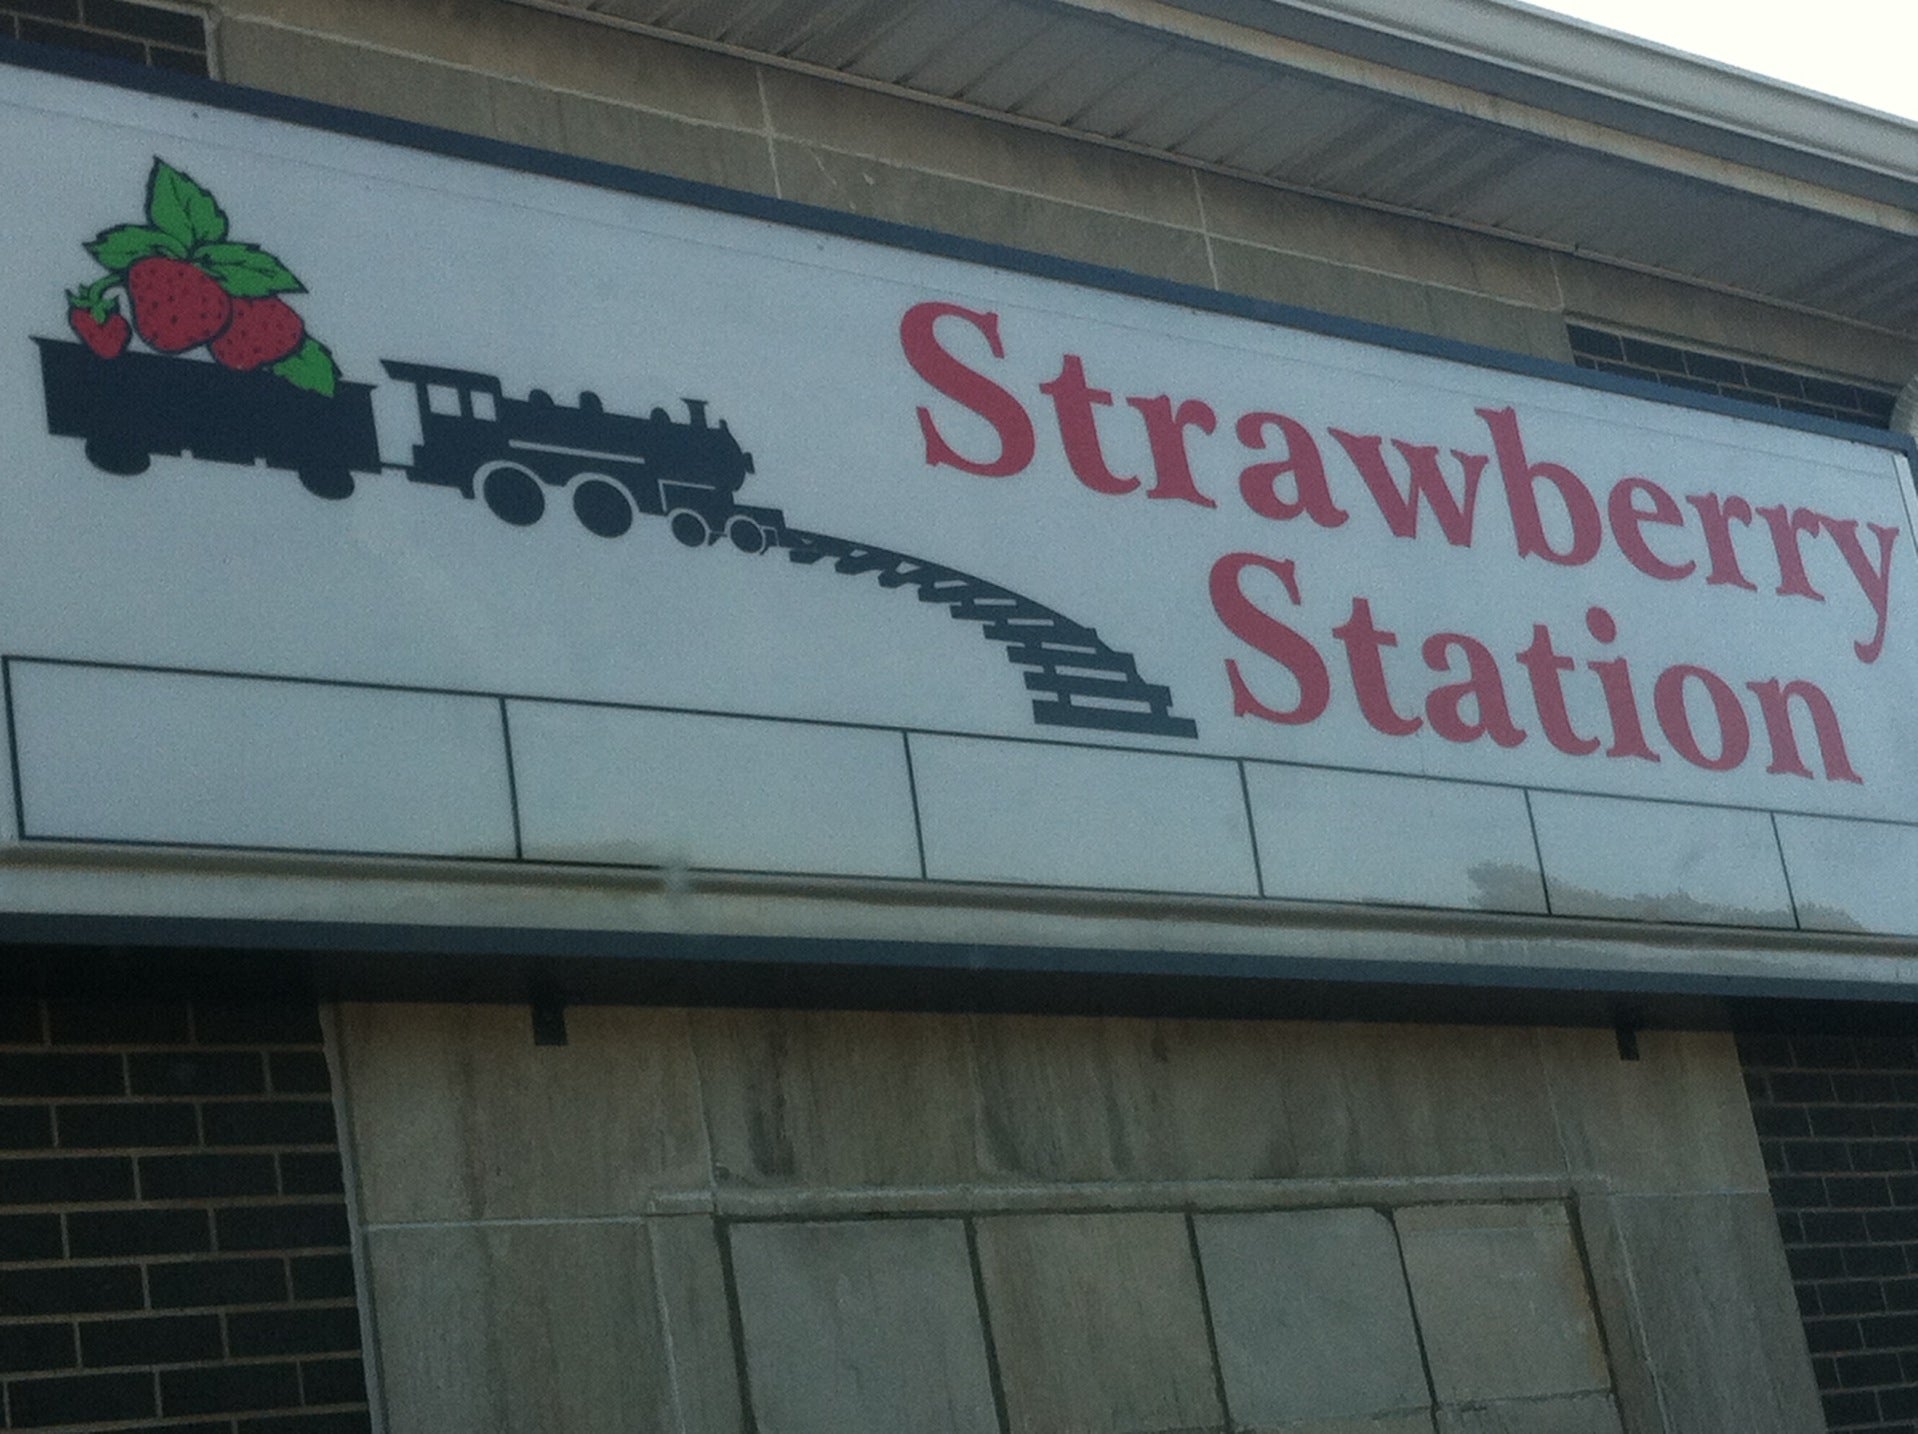 Strawberry Station 124 Main St, Portland Tennessee 37148